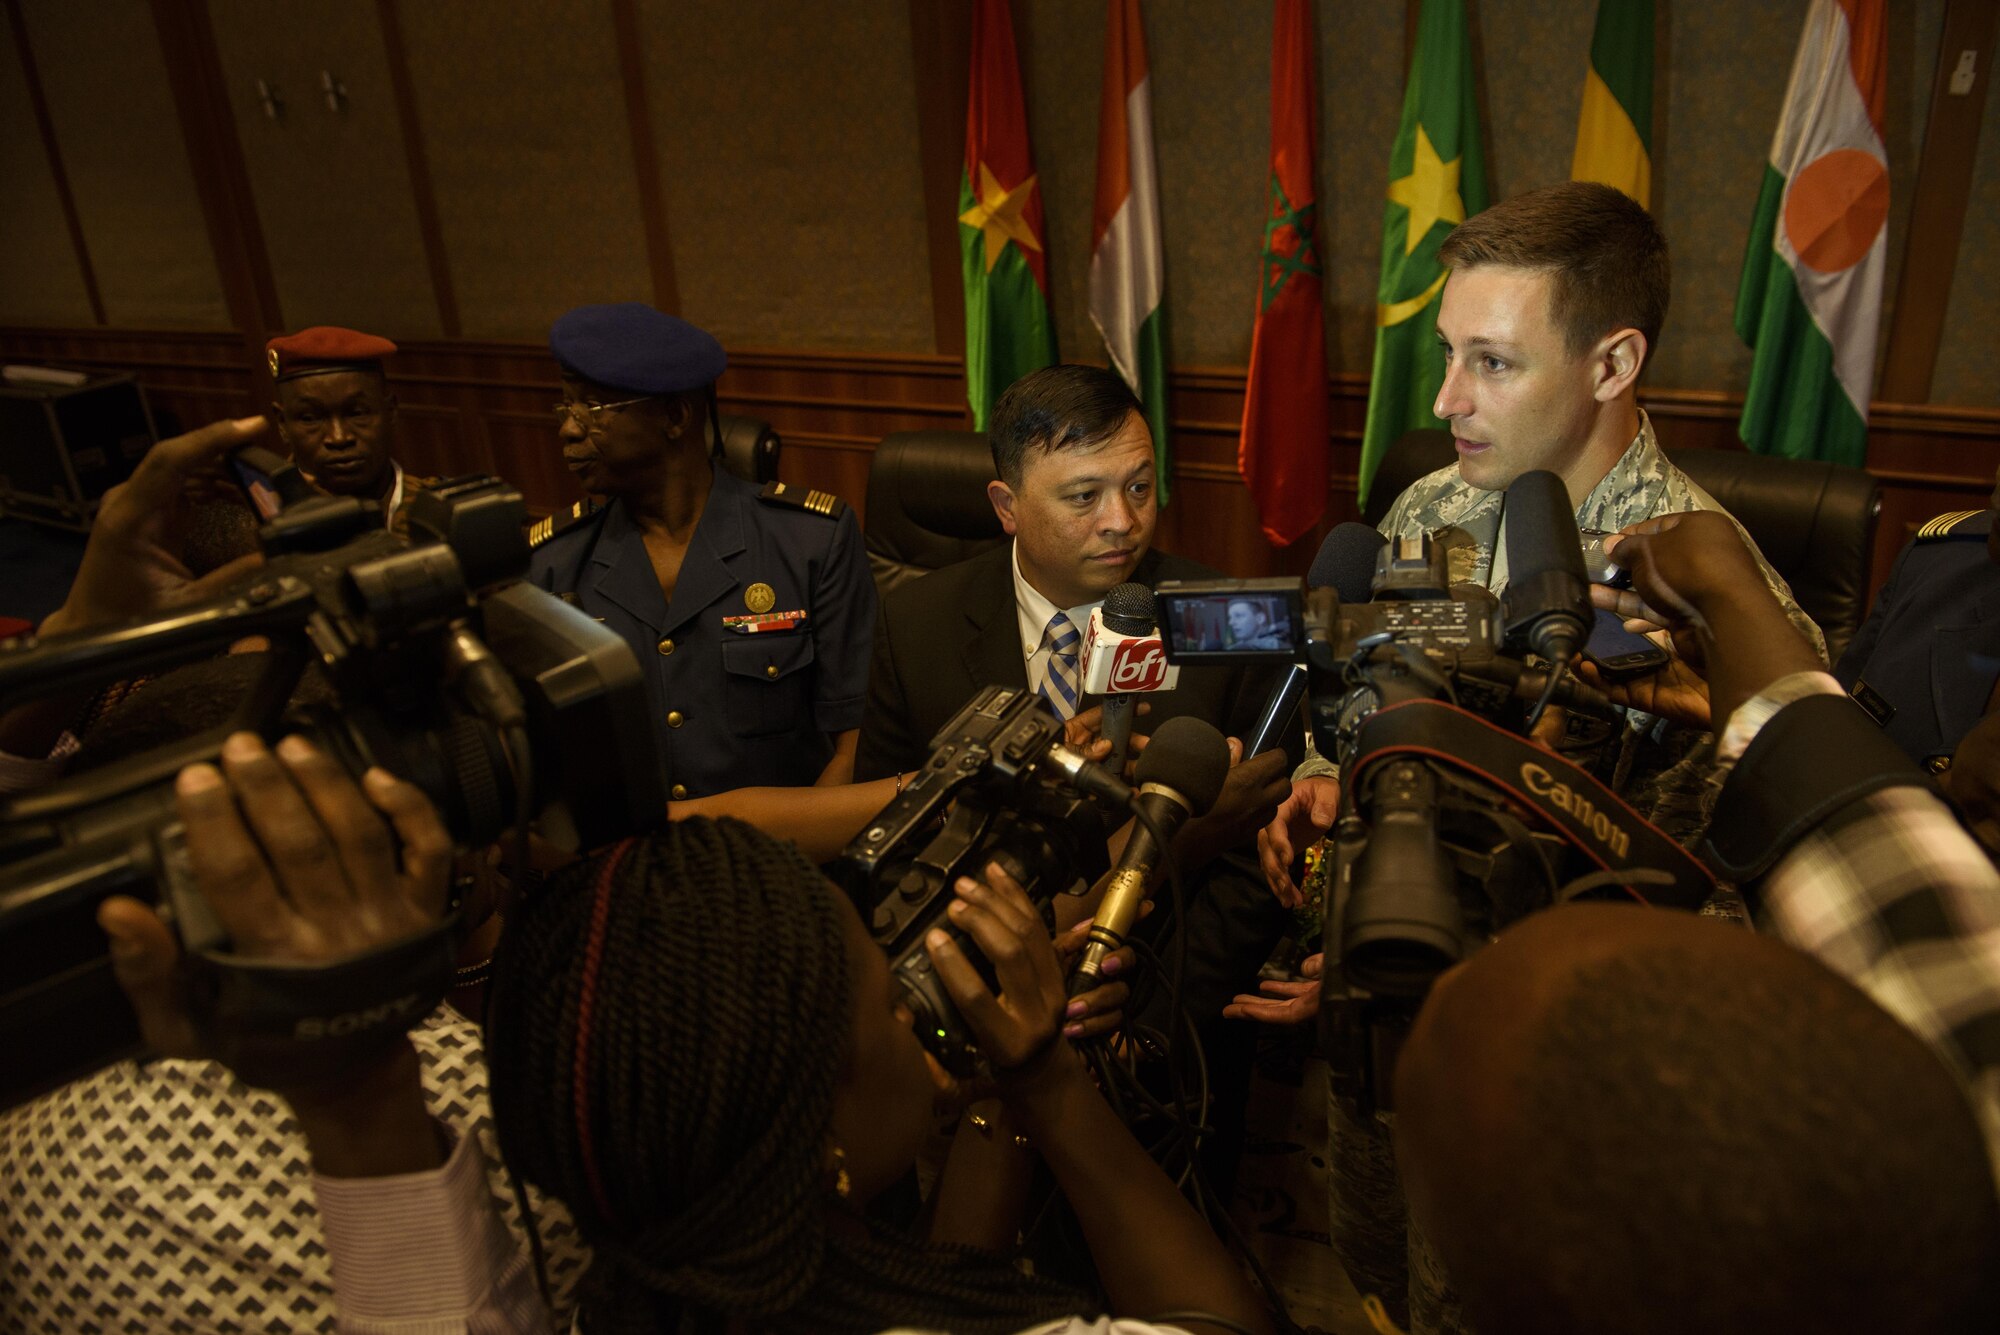 U.S. Air Force Capt. Thomas Bowen, right, translates for Col. Ric Trimillos, center, U.S. Air Forces in Europe-Air Forces Africa division chief of international affairs, during a press conference at opening ceremony of the African Partnership Flight in Ouagadougou, Burkina Faso, April 18, 2017. APF in Burkina Faso hosted participants from Chad, Mali, Mauritania, Niger, Cote d’Ivoire and Morocco to help strengthen relationships and share best practices.
(U.S. Air Force photo by Staff Sgt. Jonathan Snyder)
